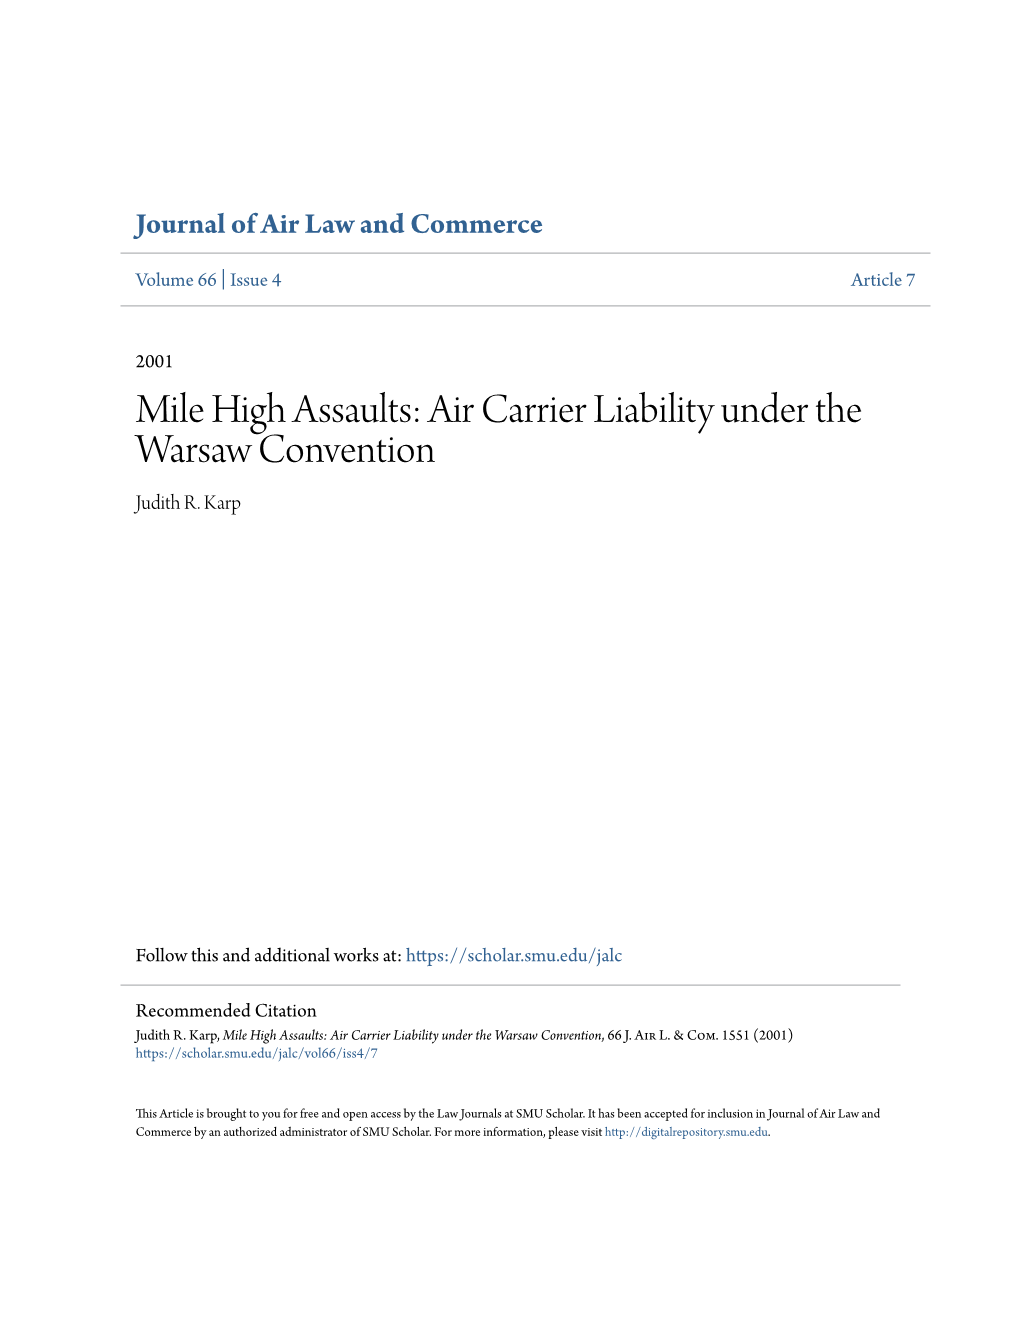 Mile High Assaults: Air Carrier Liability Under the Warsaw Convention Judith R